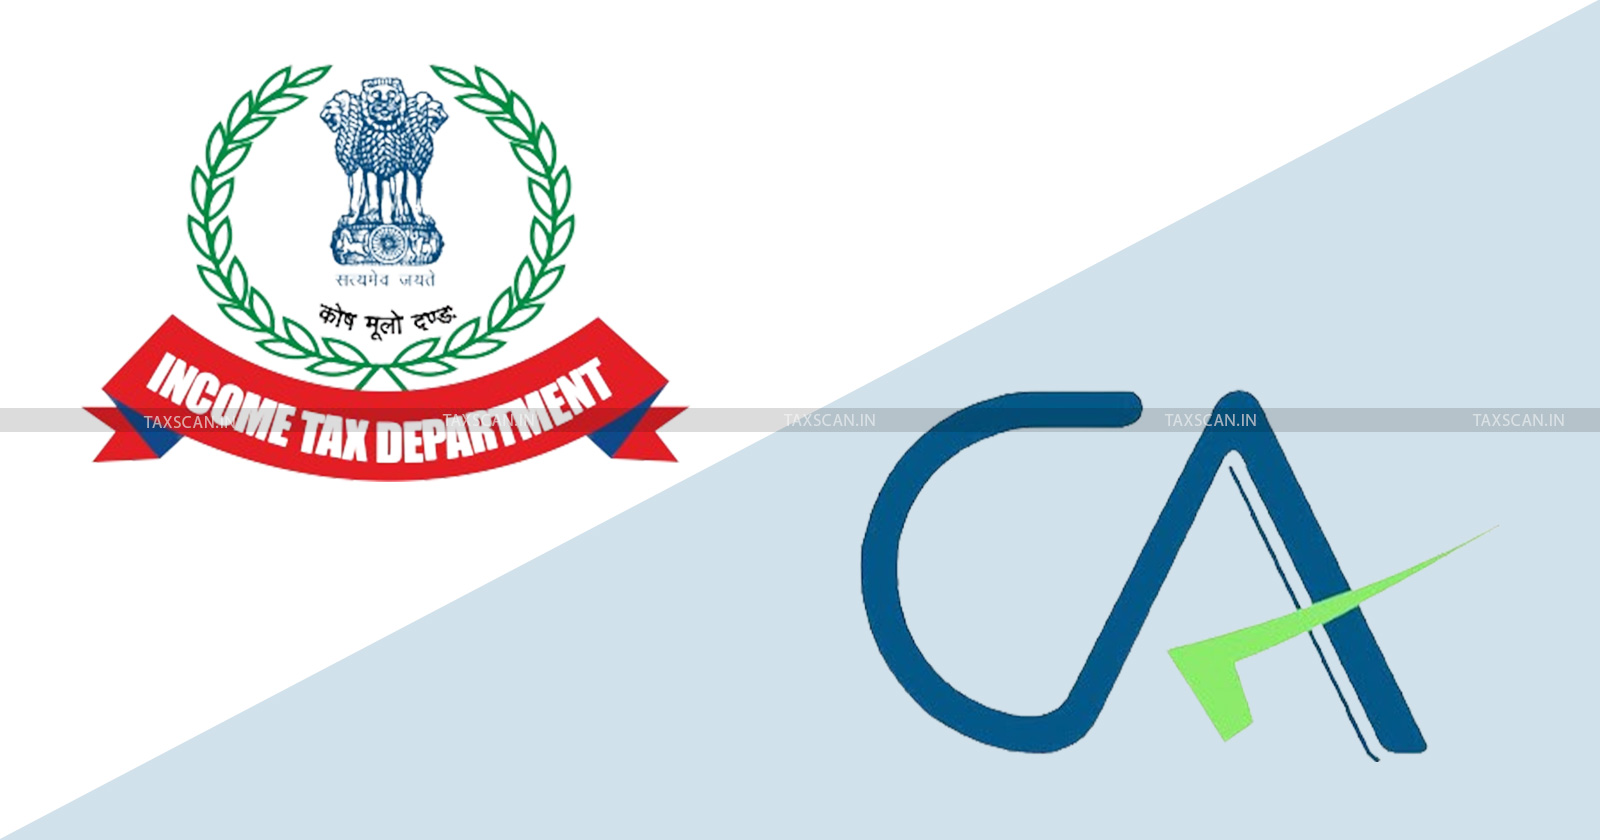 CA - Chartered Accountant - ICAI - Income Tax Department - CA Cleared of Tax Evasion Charges - Taxscan